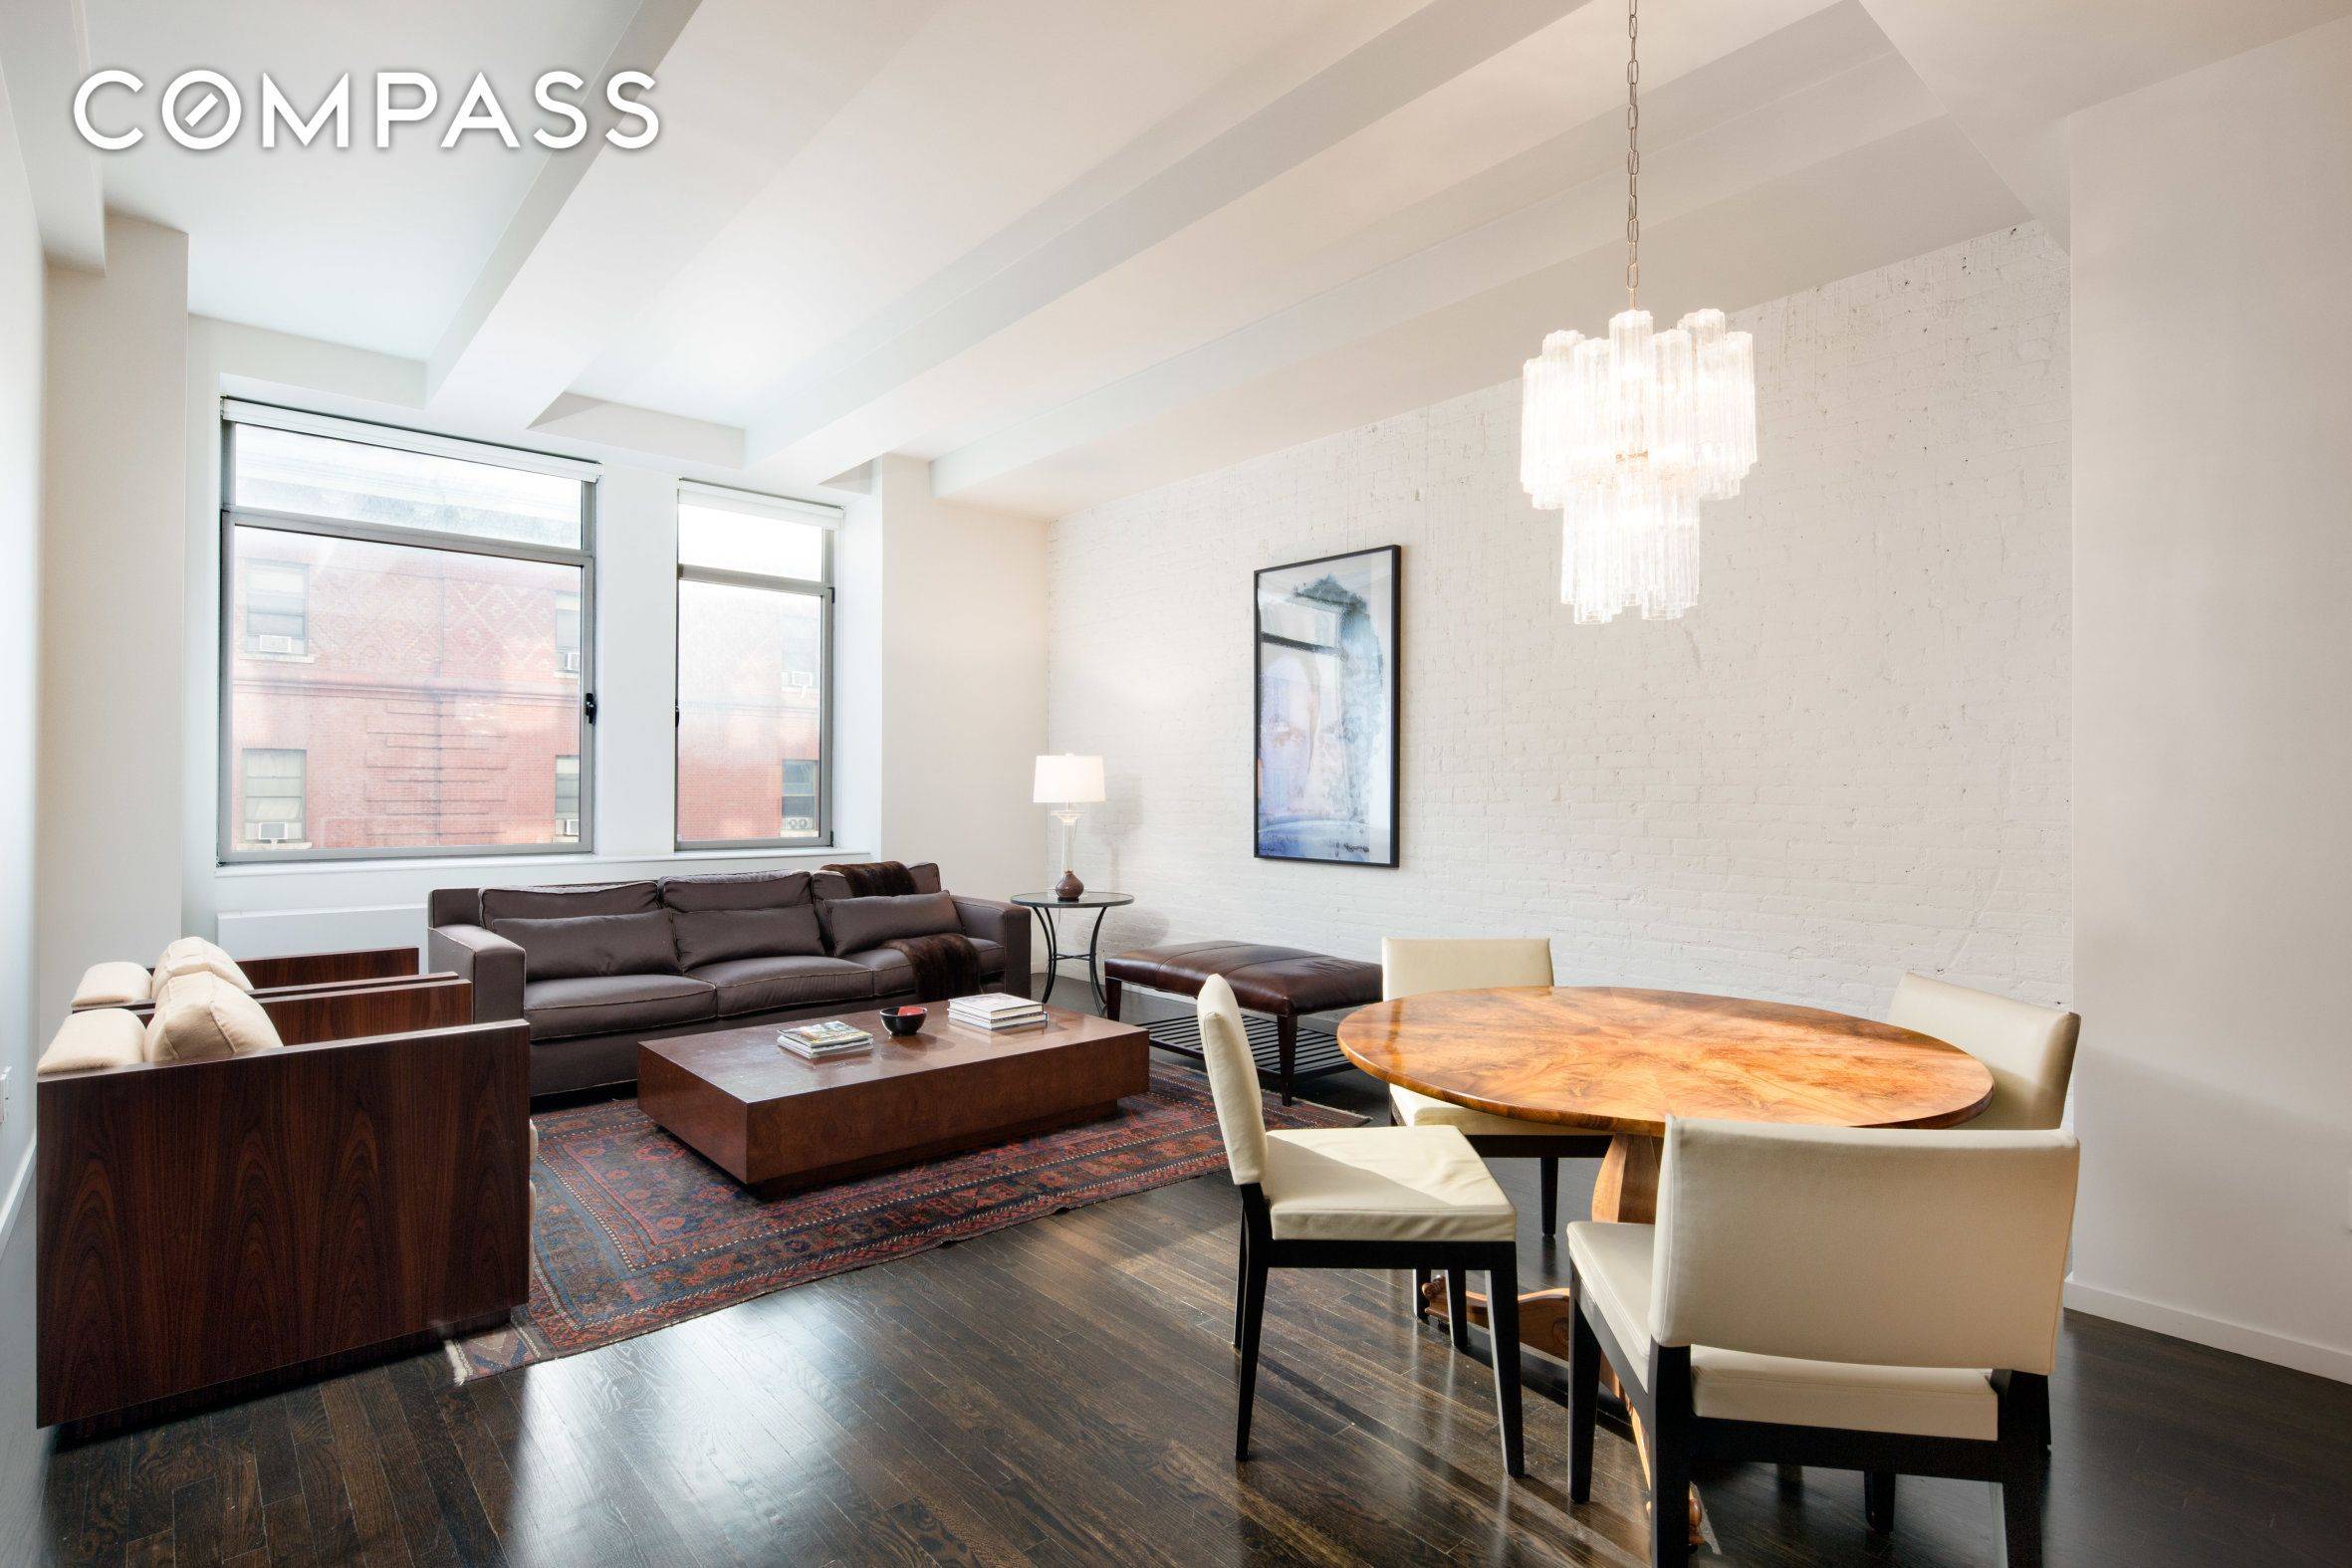 Heart of Chelsea renovated condo loft with 2 beds and baths featuring dark hardwood floors, Calcutta marble counters walnut kitchen cabinets with Viking and SubZero appliances, library den foyer space, ...